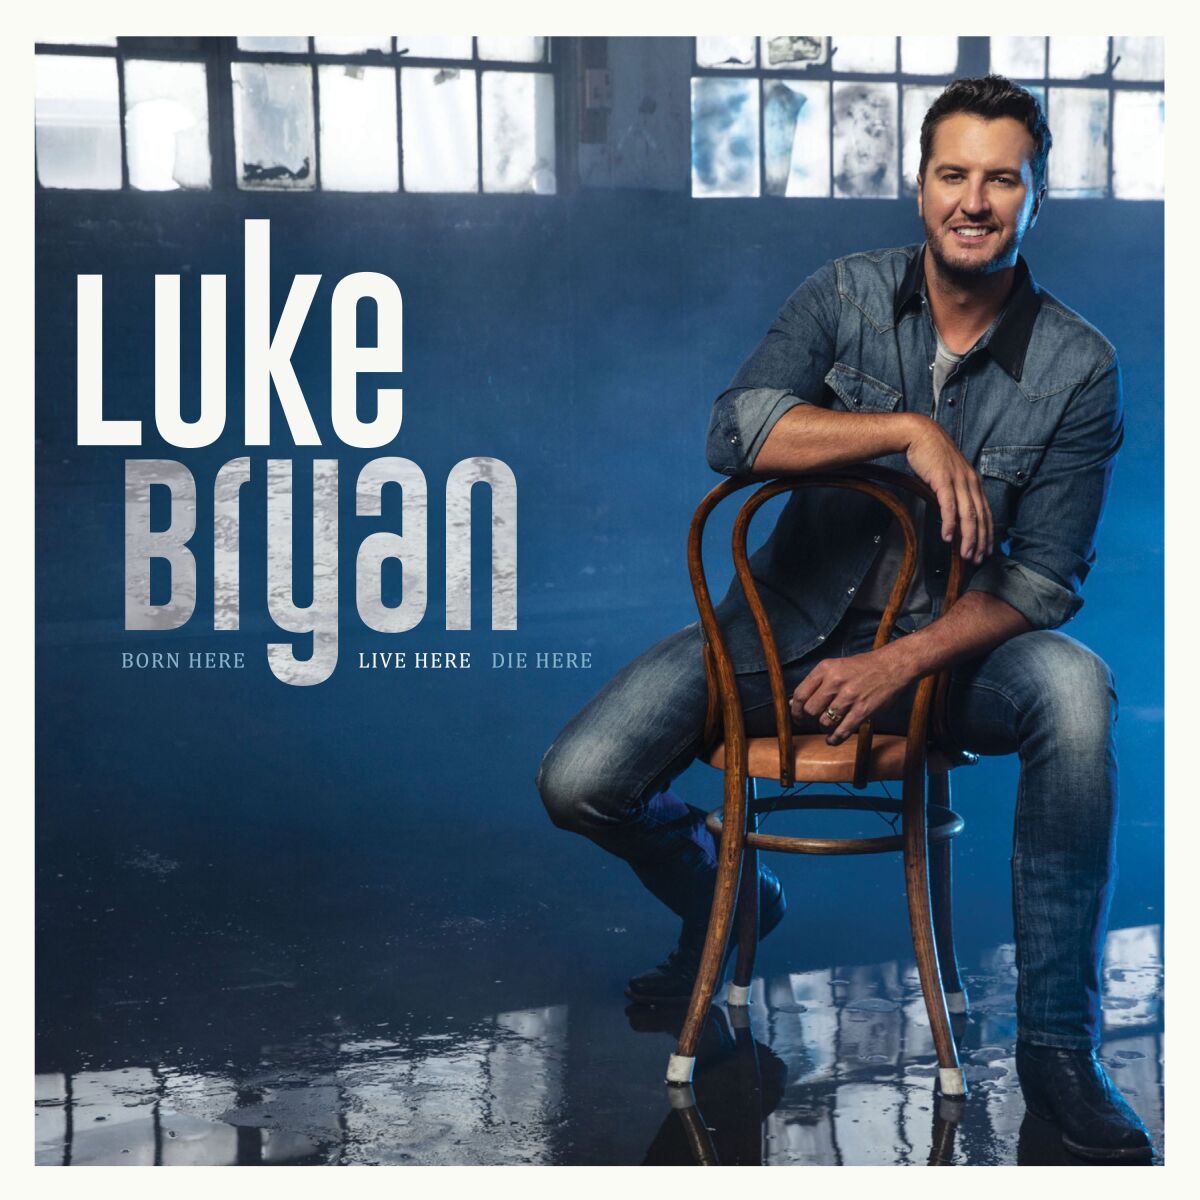 This cover image released by Capitol Records Nashville shows "Born Here Live Here Die Here" by Luke Bryan, out on Friday. (Capitol Records Nashville via AP)